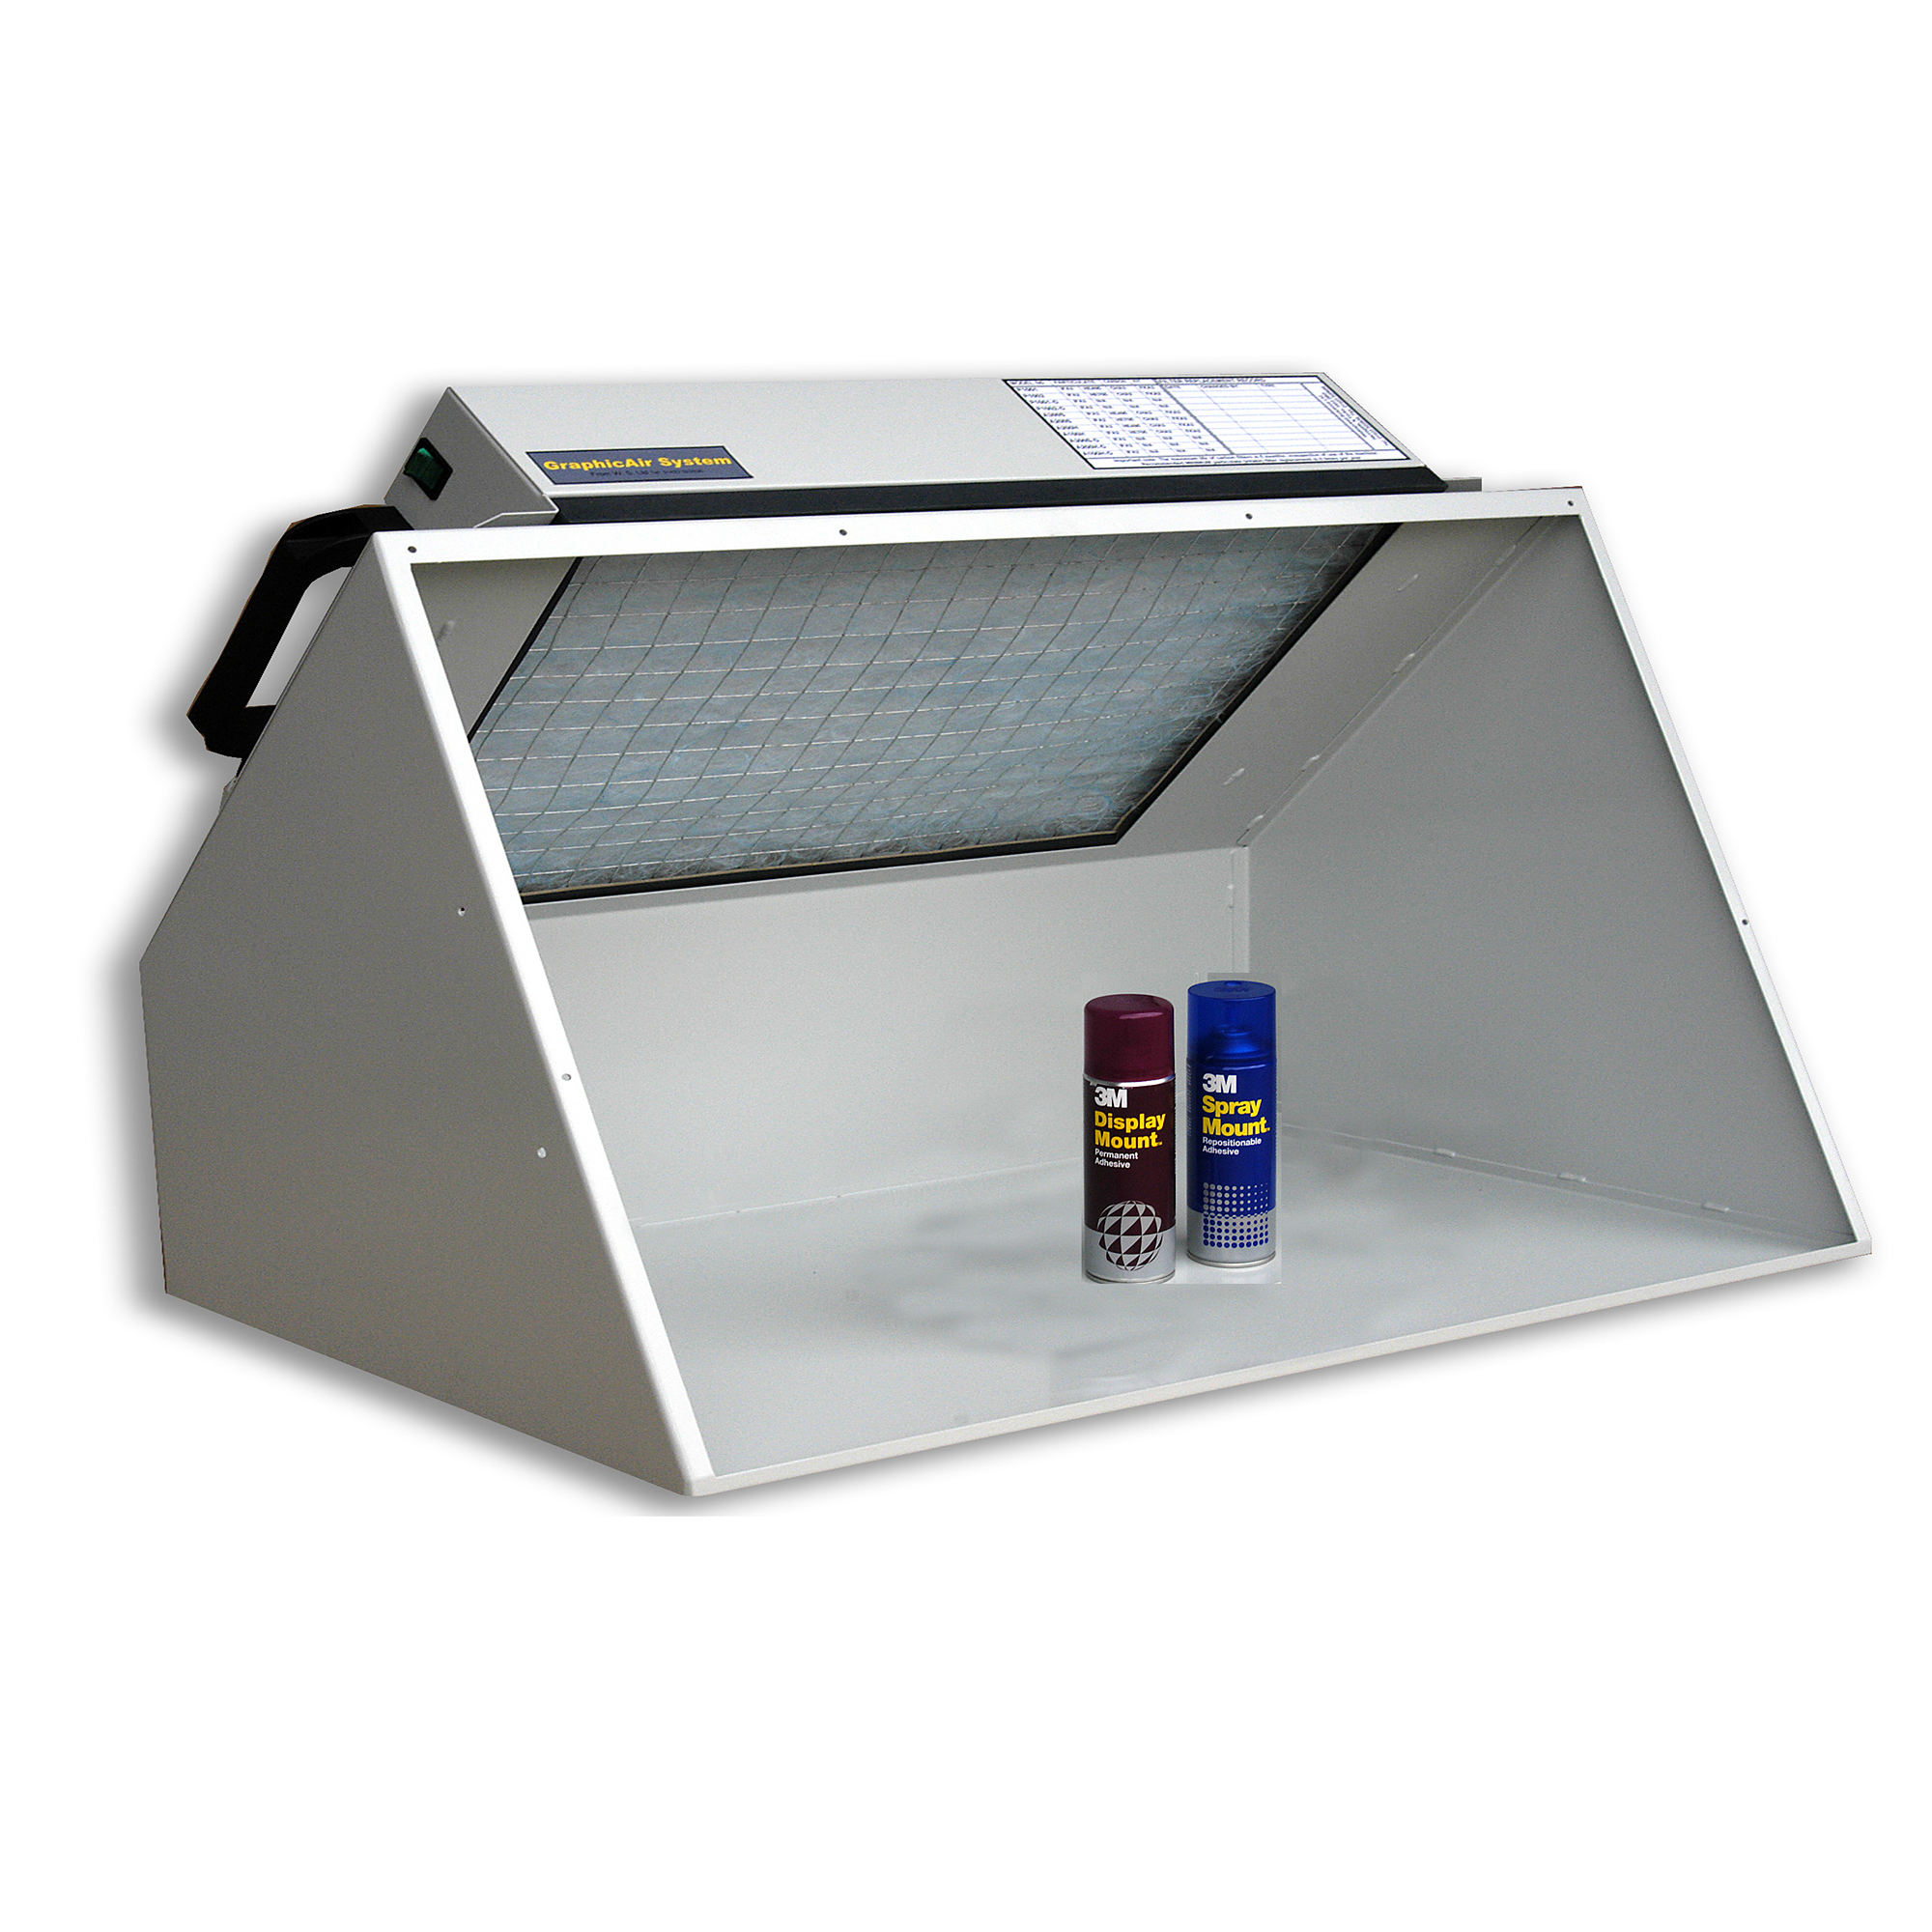 Hood Mounted Filtration Cabinet